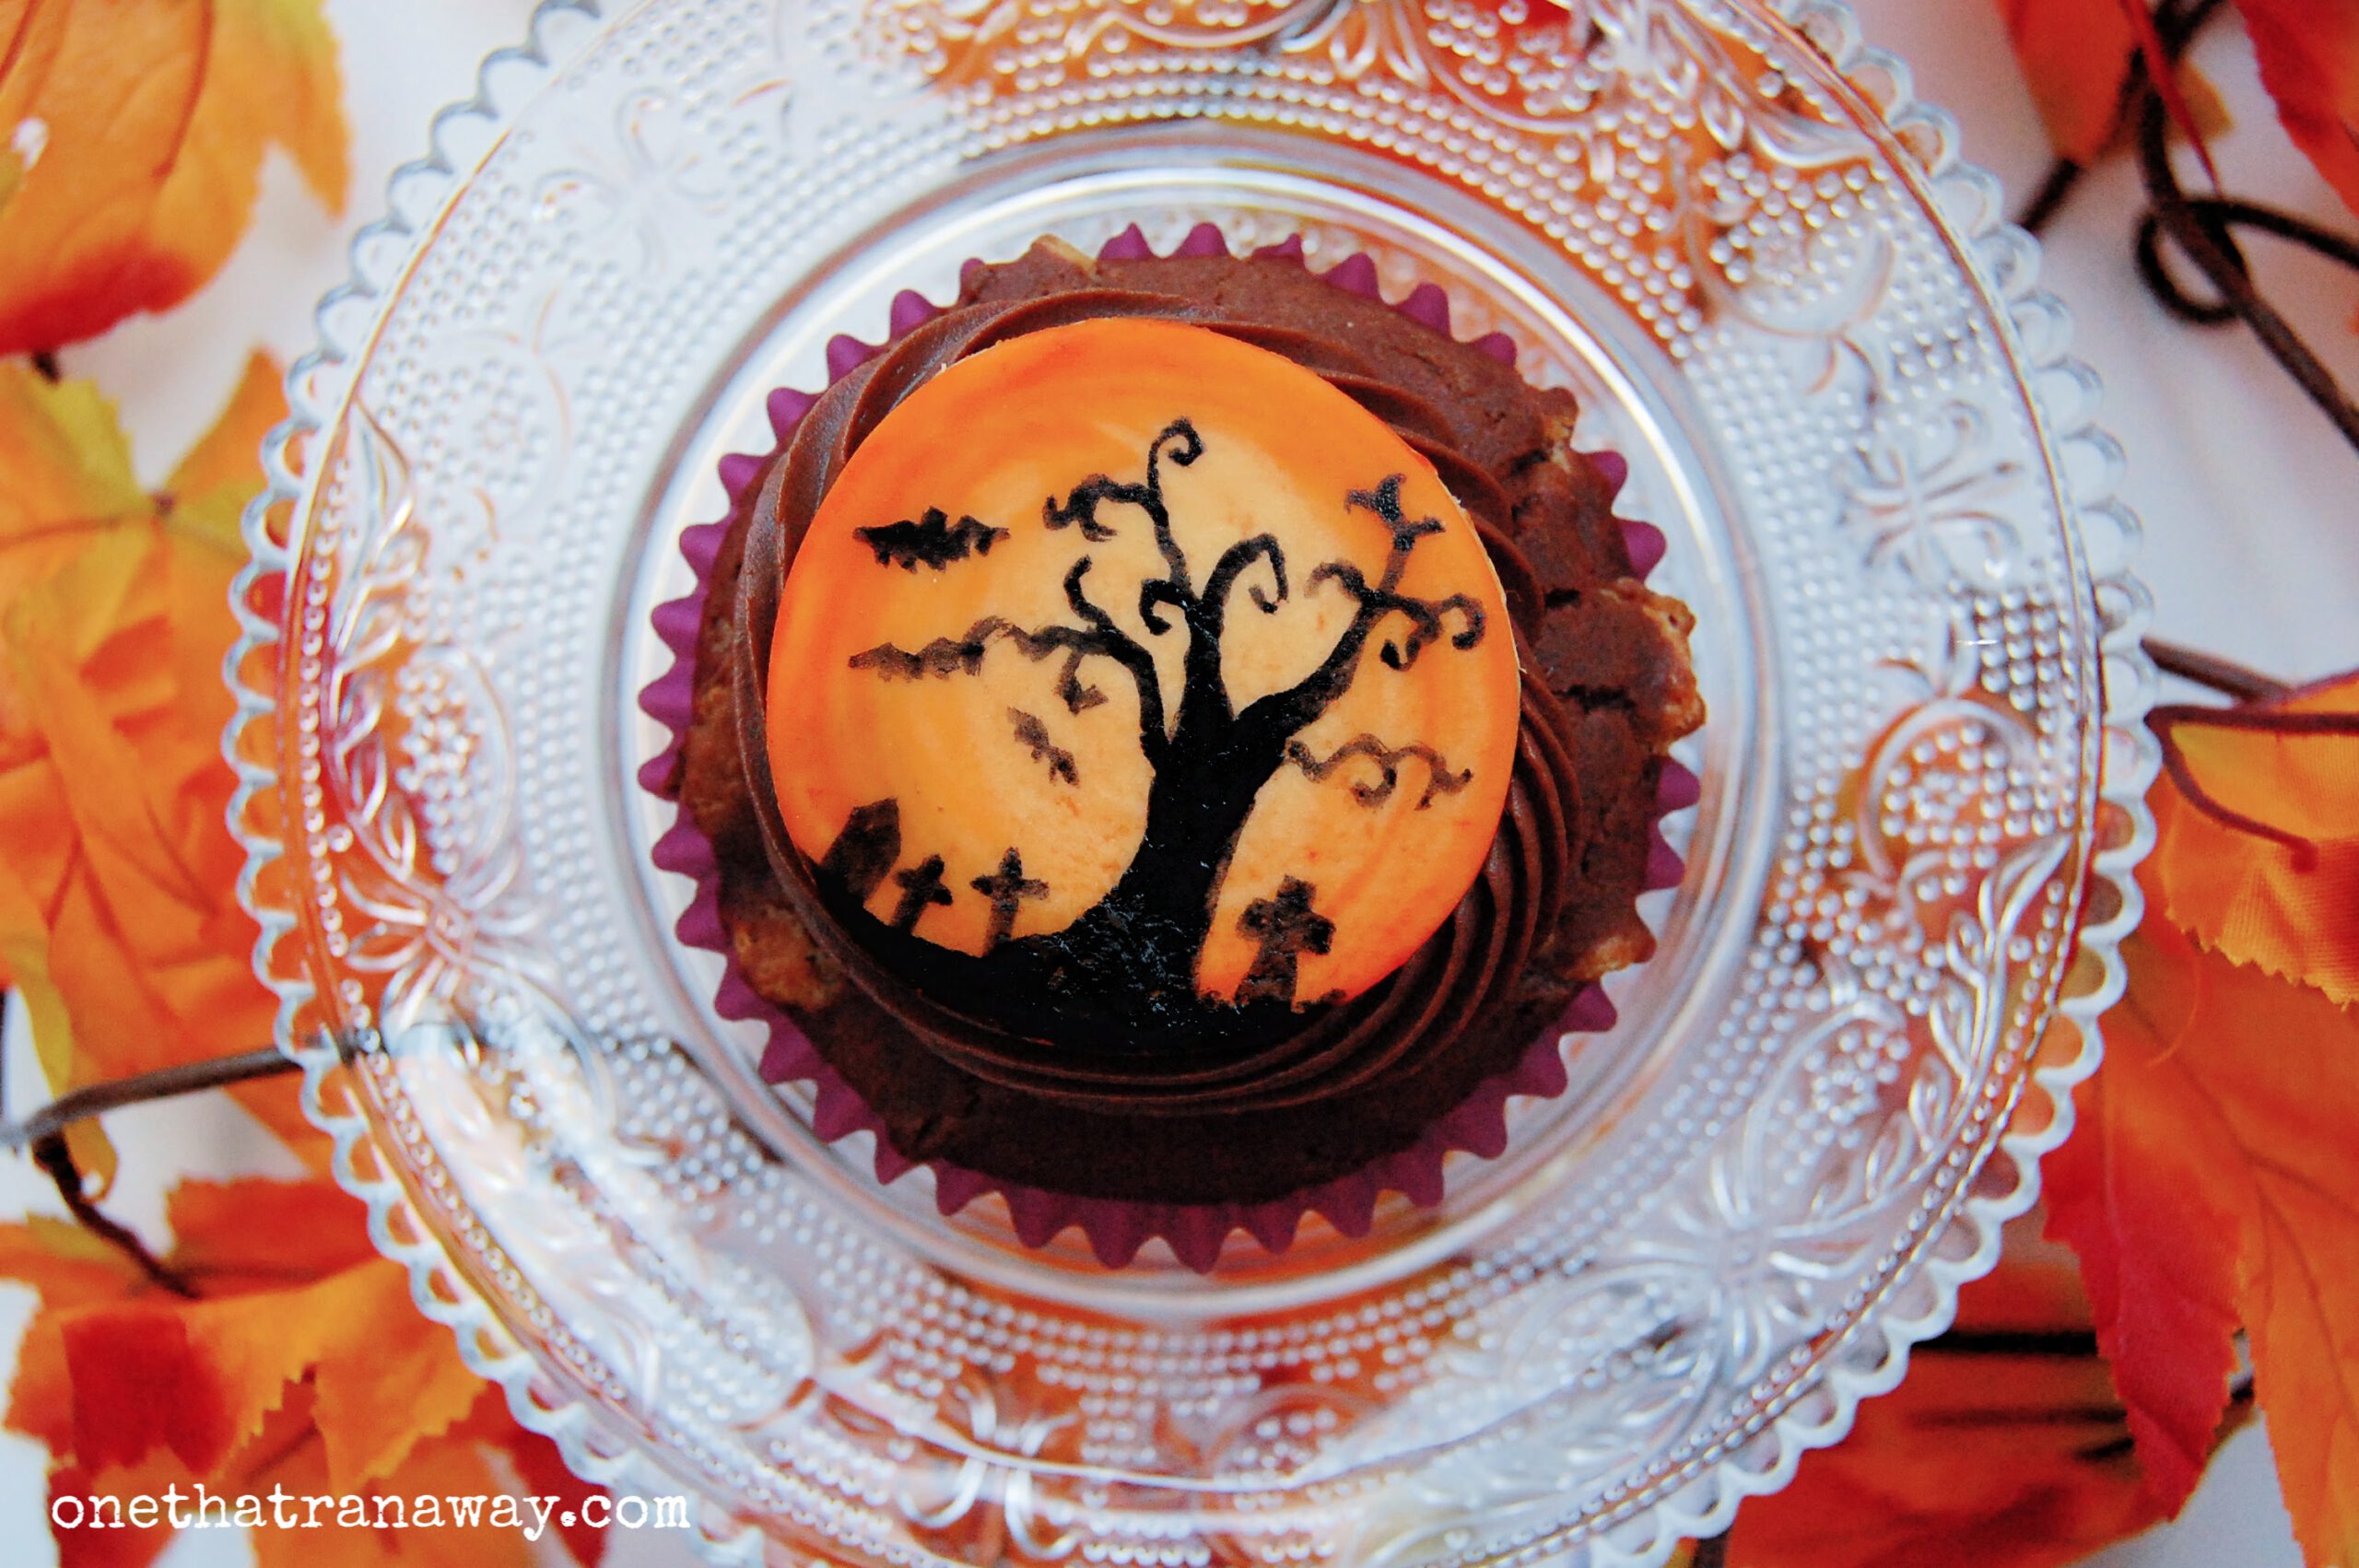 chocolate cupcake with an orange fondant topper showing the silhouette of a tree and graveyard